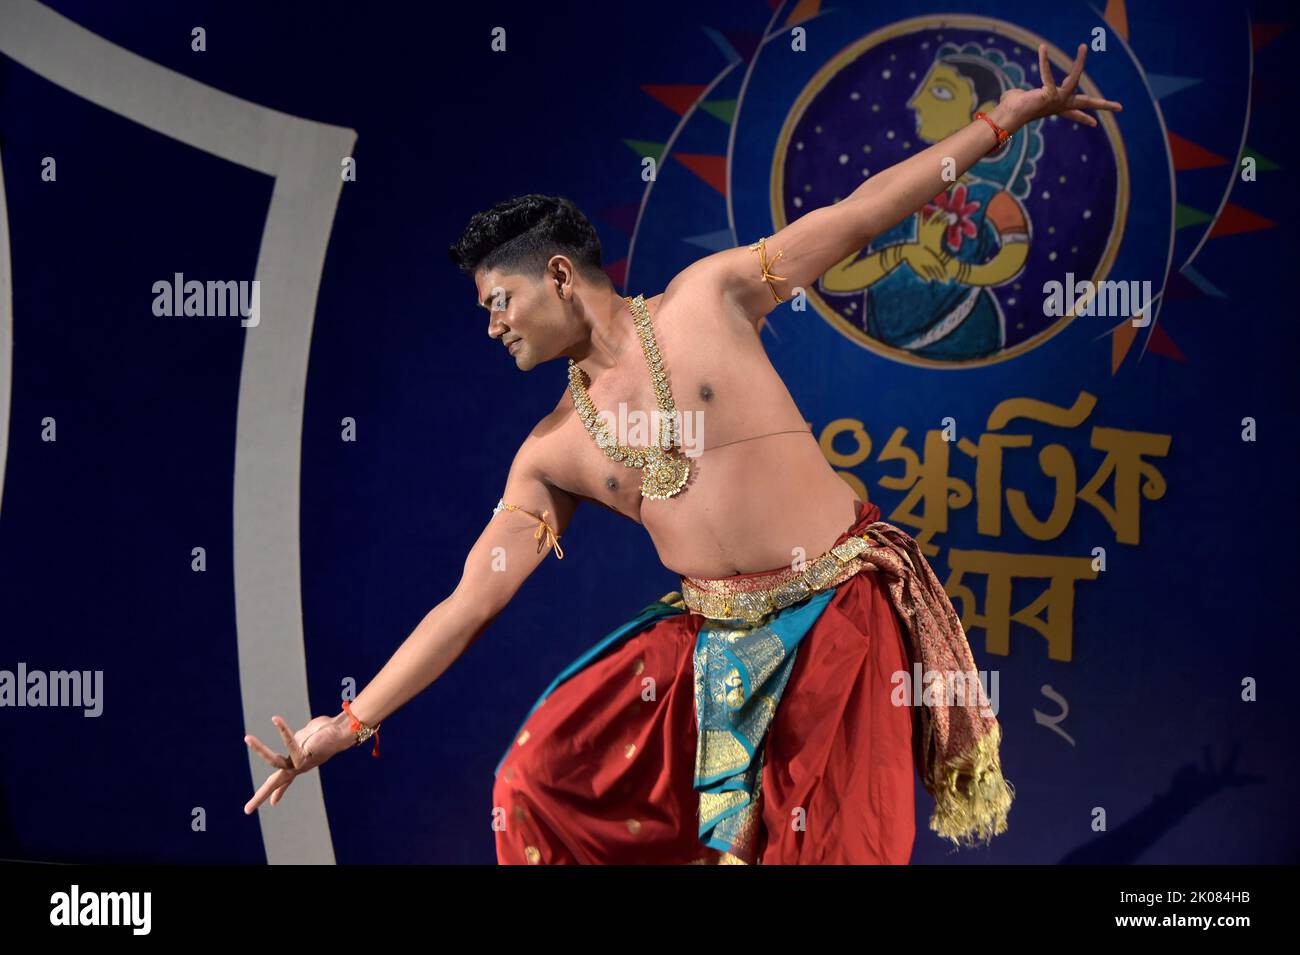 Dhaka. 10th Sep, 2022. A man performs dance during a cultural festival in Dhaka, Bangladesh, Sept. 9, 2022. Credit: Xinhua/Alamy Live News Stock Photo